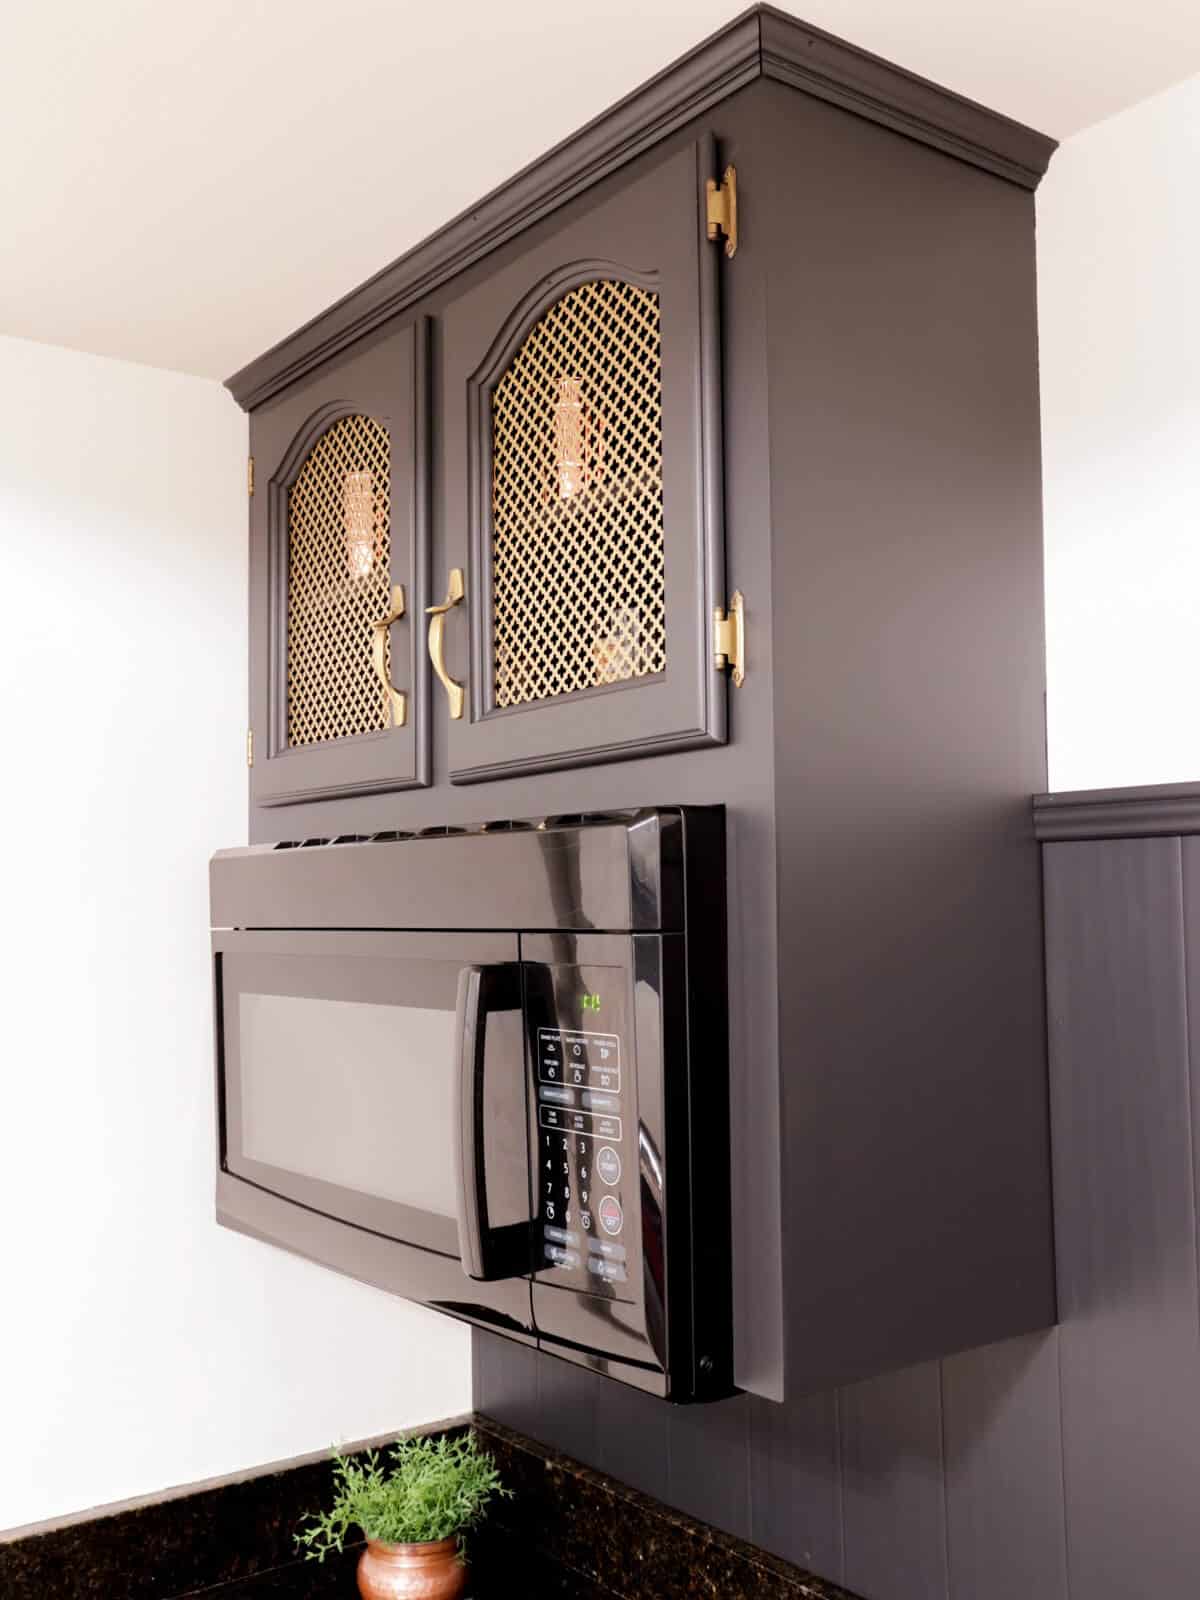 old cabinets updated with brass insert above a microwave range hood